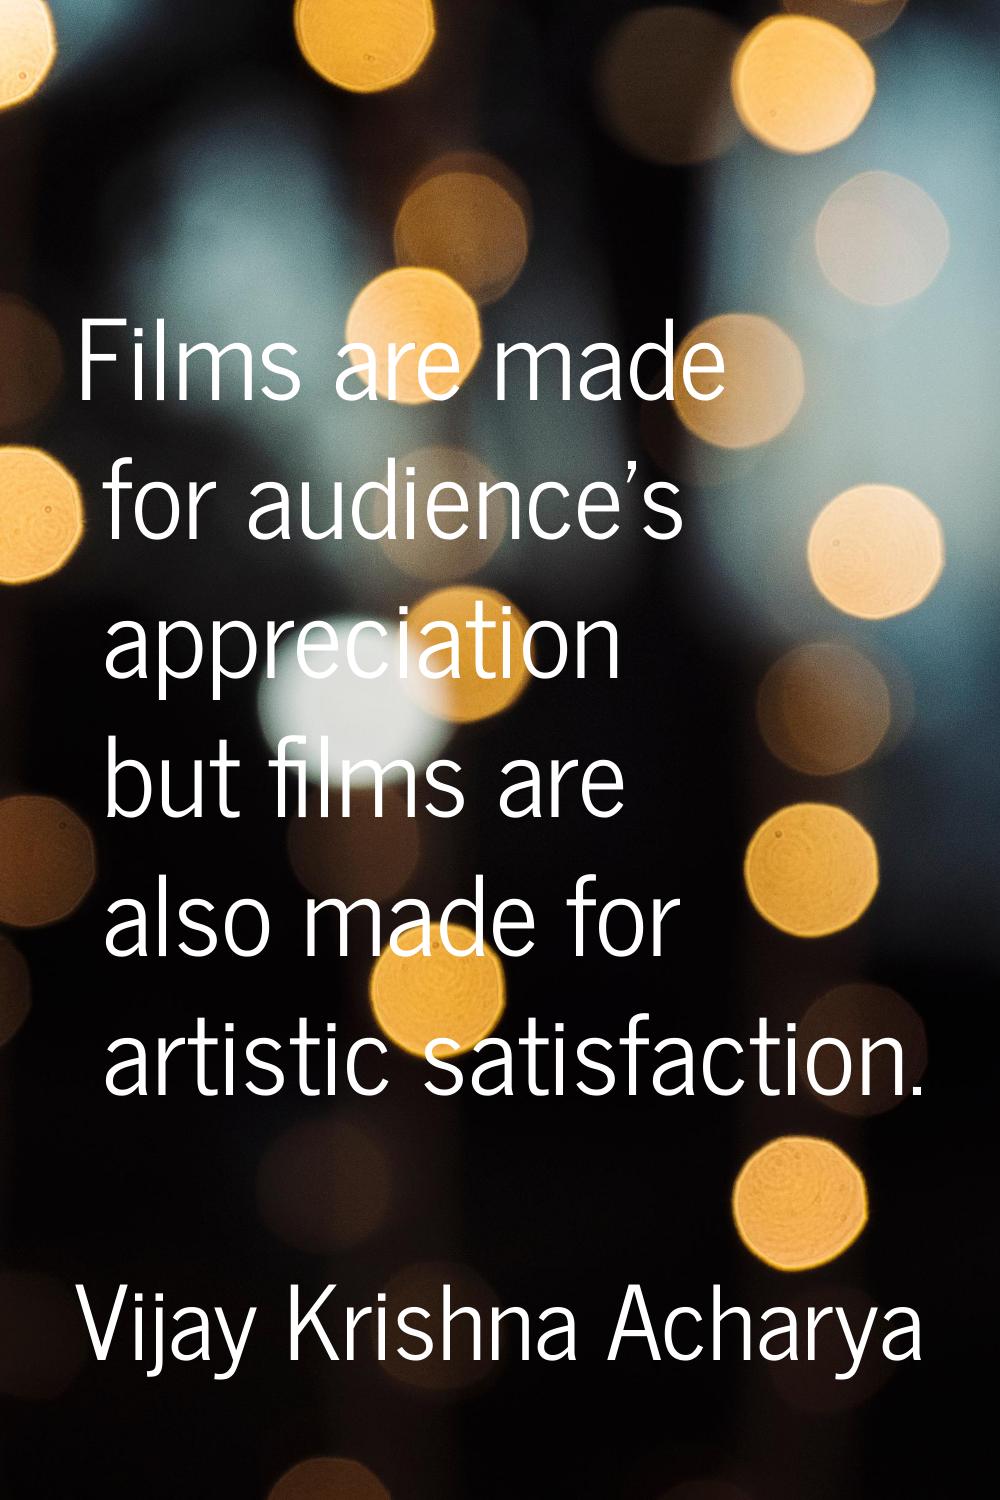 Films are made for audience's appreciation but films are also made for artistic satisfaction.